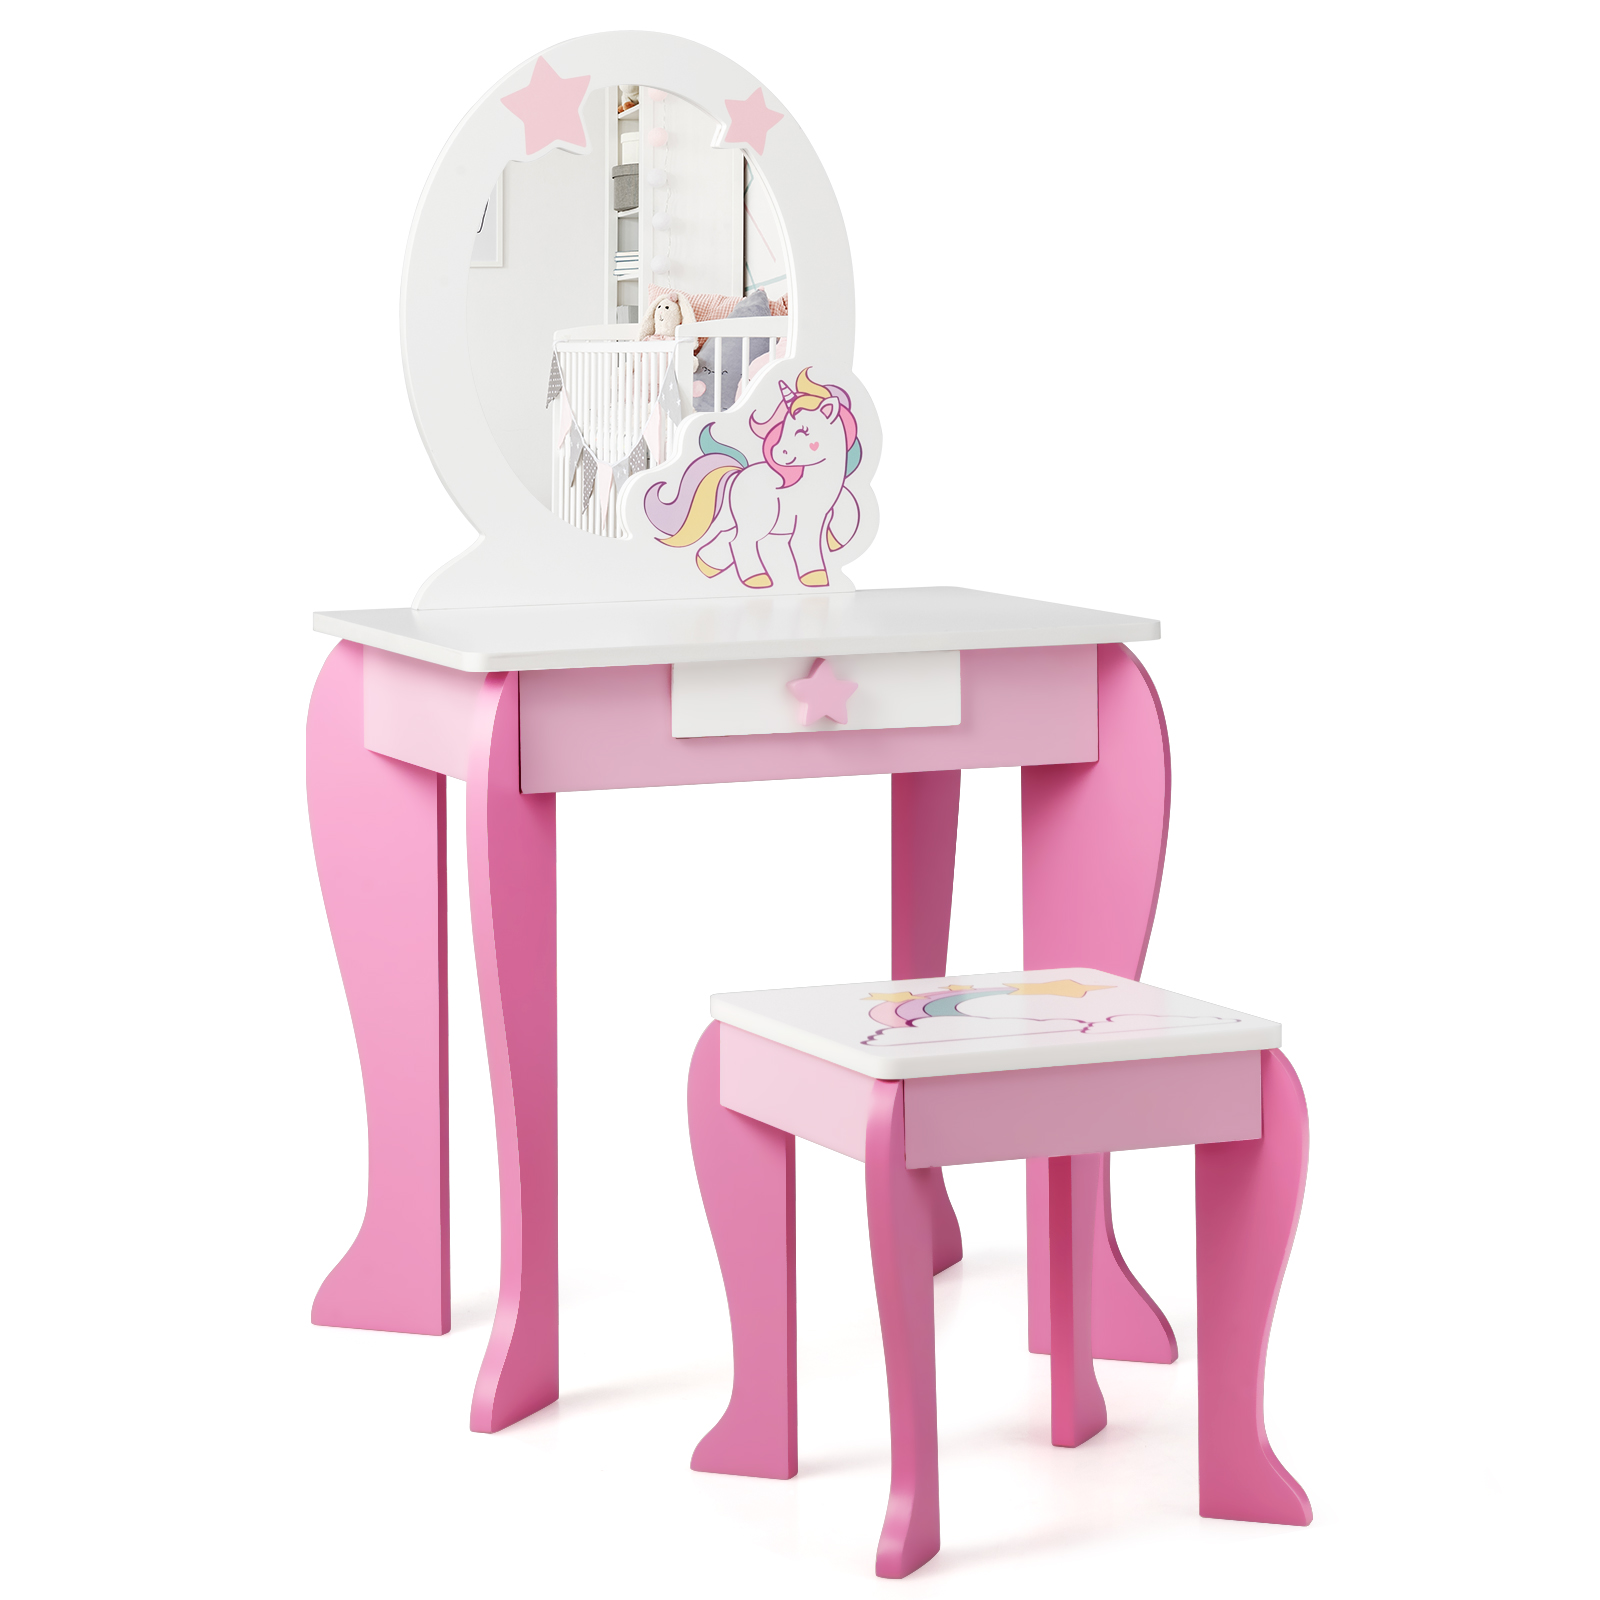 Kids Vanity Table and Chair Set with Mirror and Detachable Top-Pink